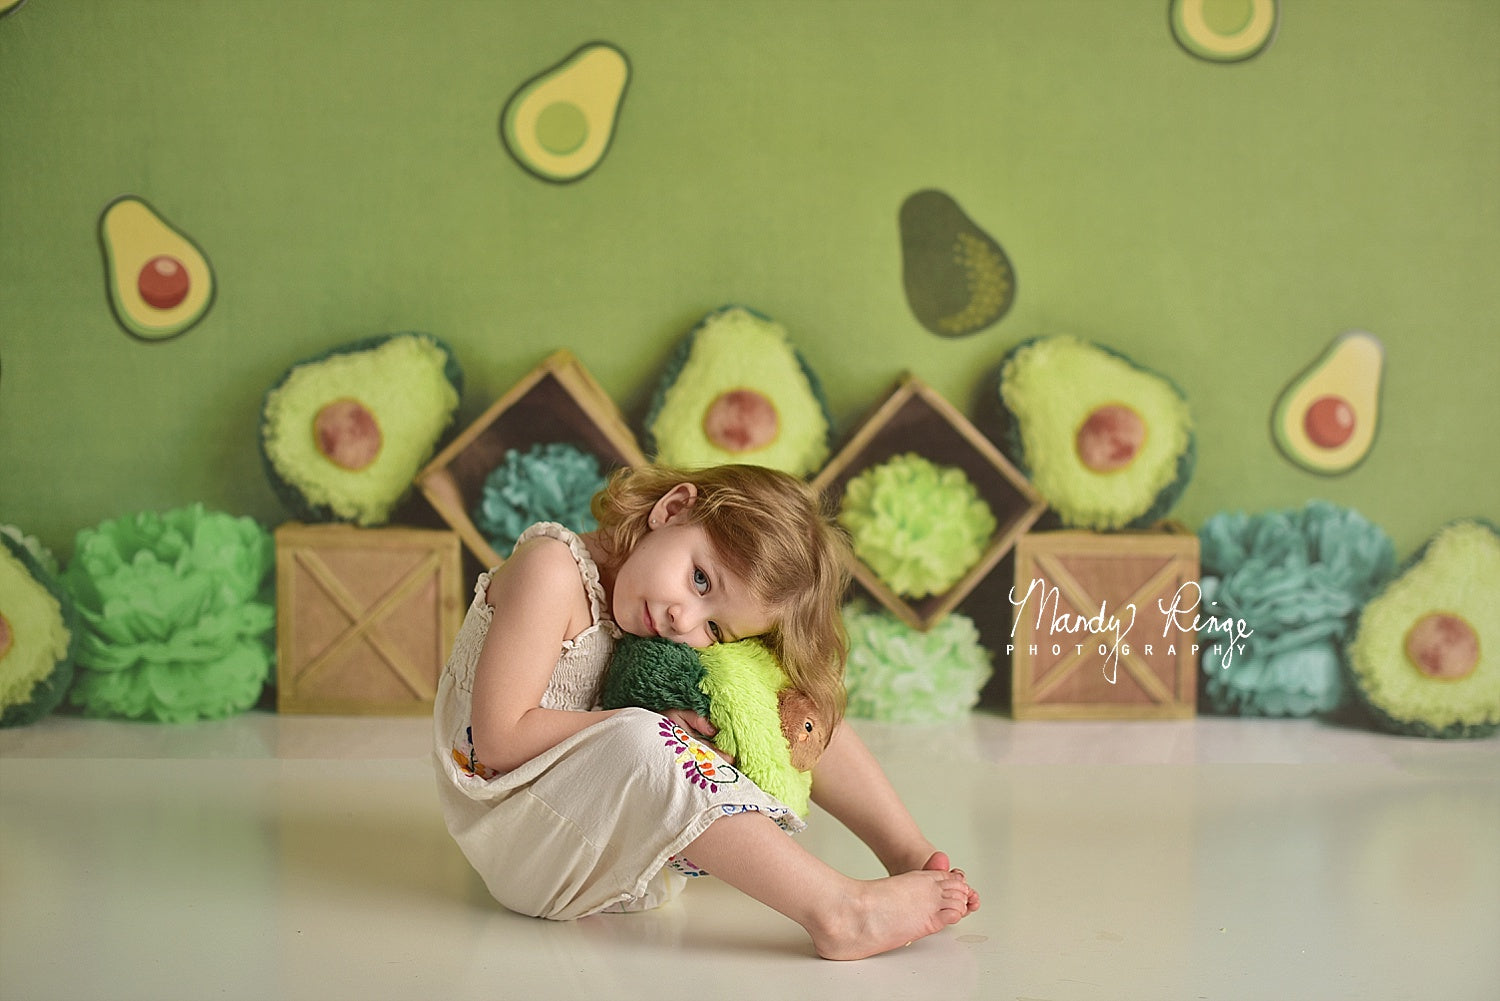 Kate Green Avocado Party Children Summer Backdrop Designed By Mandy Ringe Photography - Kate Backdrop AU